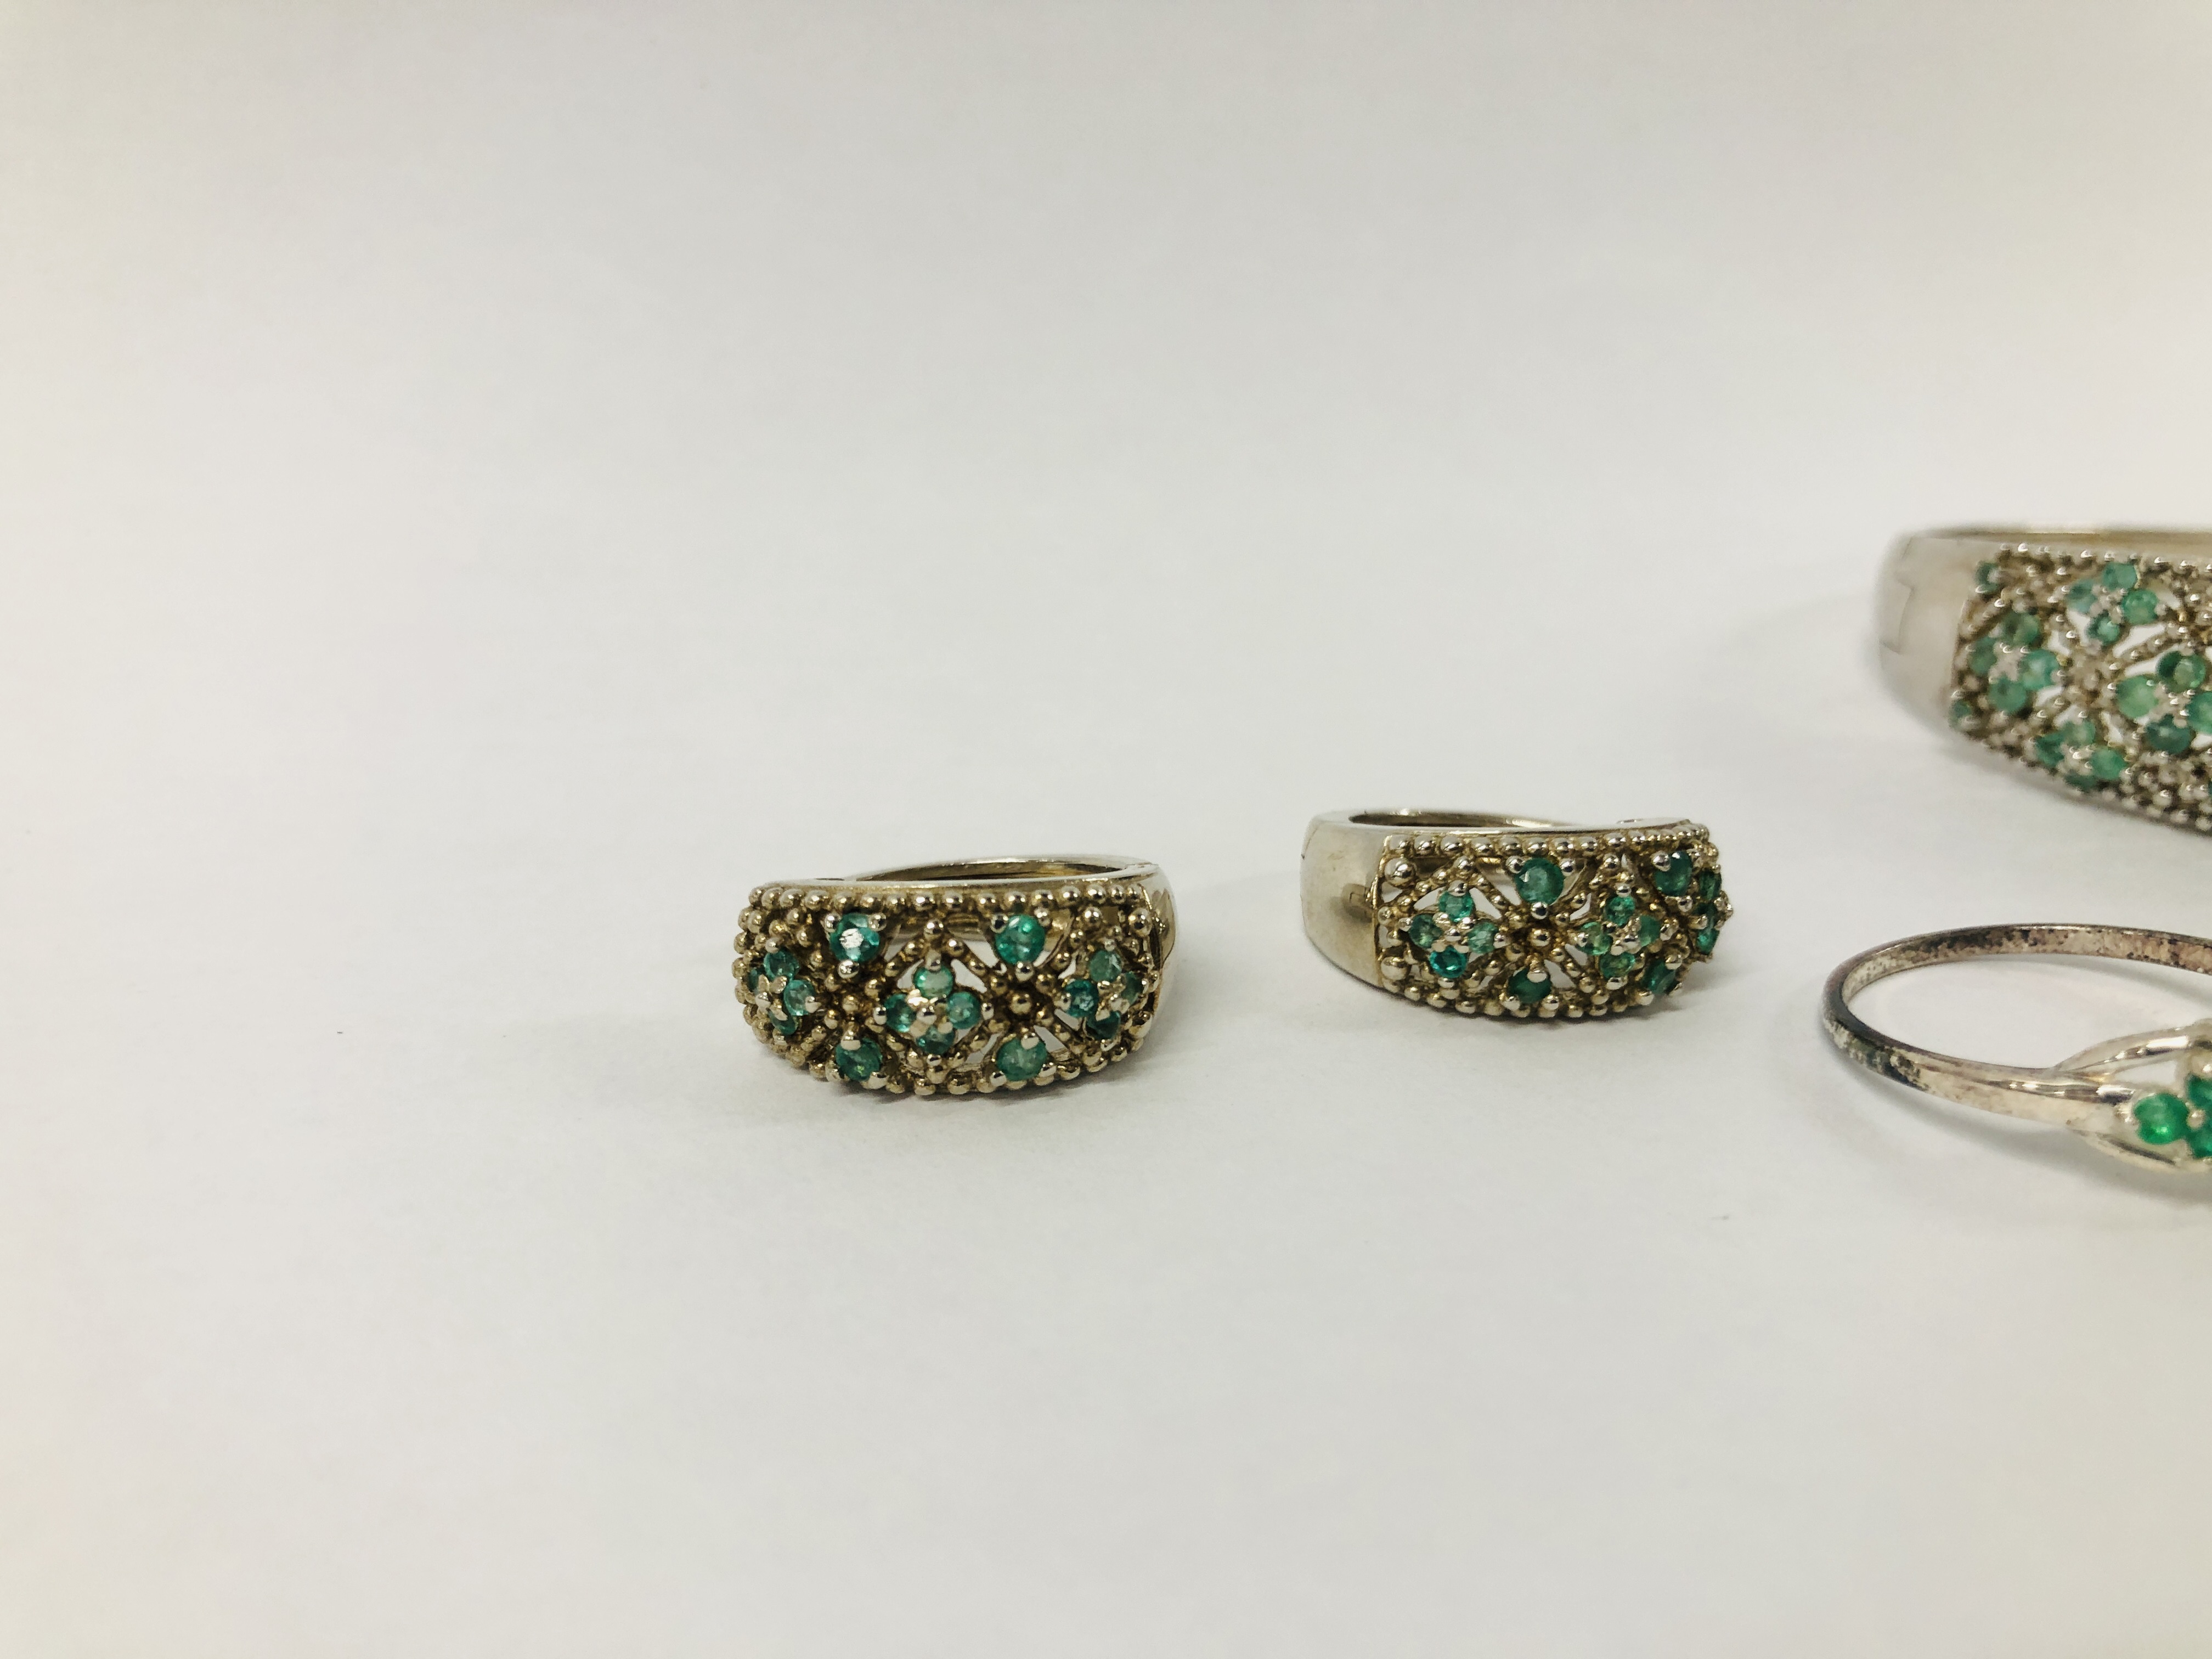 DESIGNER SILVER HINGED BANGLE SET WITH GREEN STONES IN A FLOWER HEAD DESIGN ALONG WITH A PAIR OF - Image 2 of 11